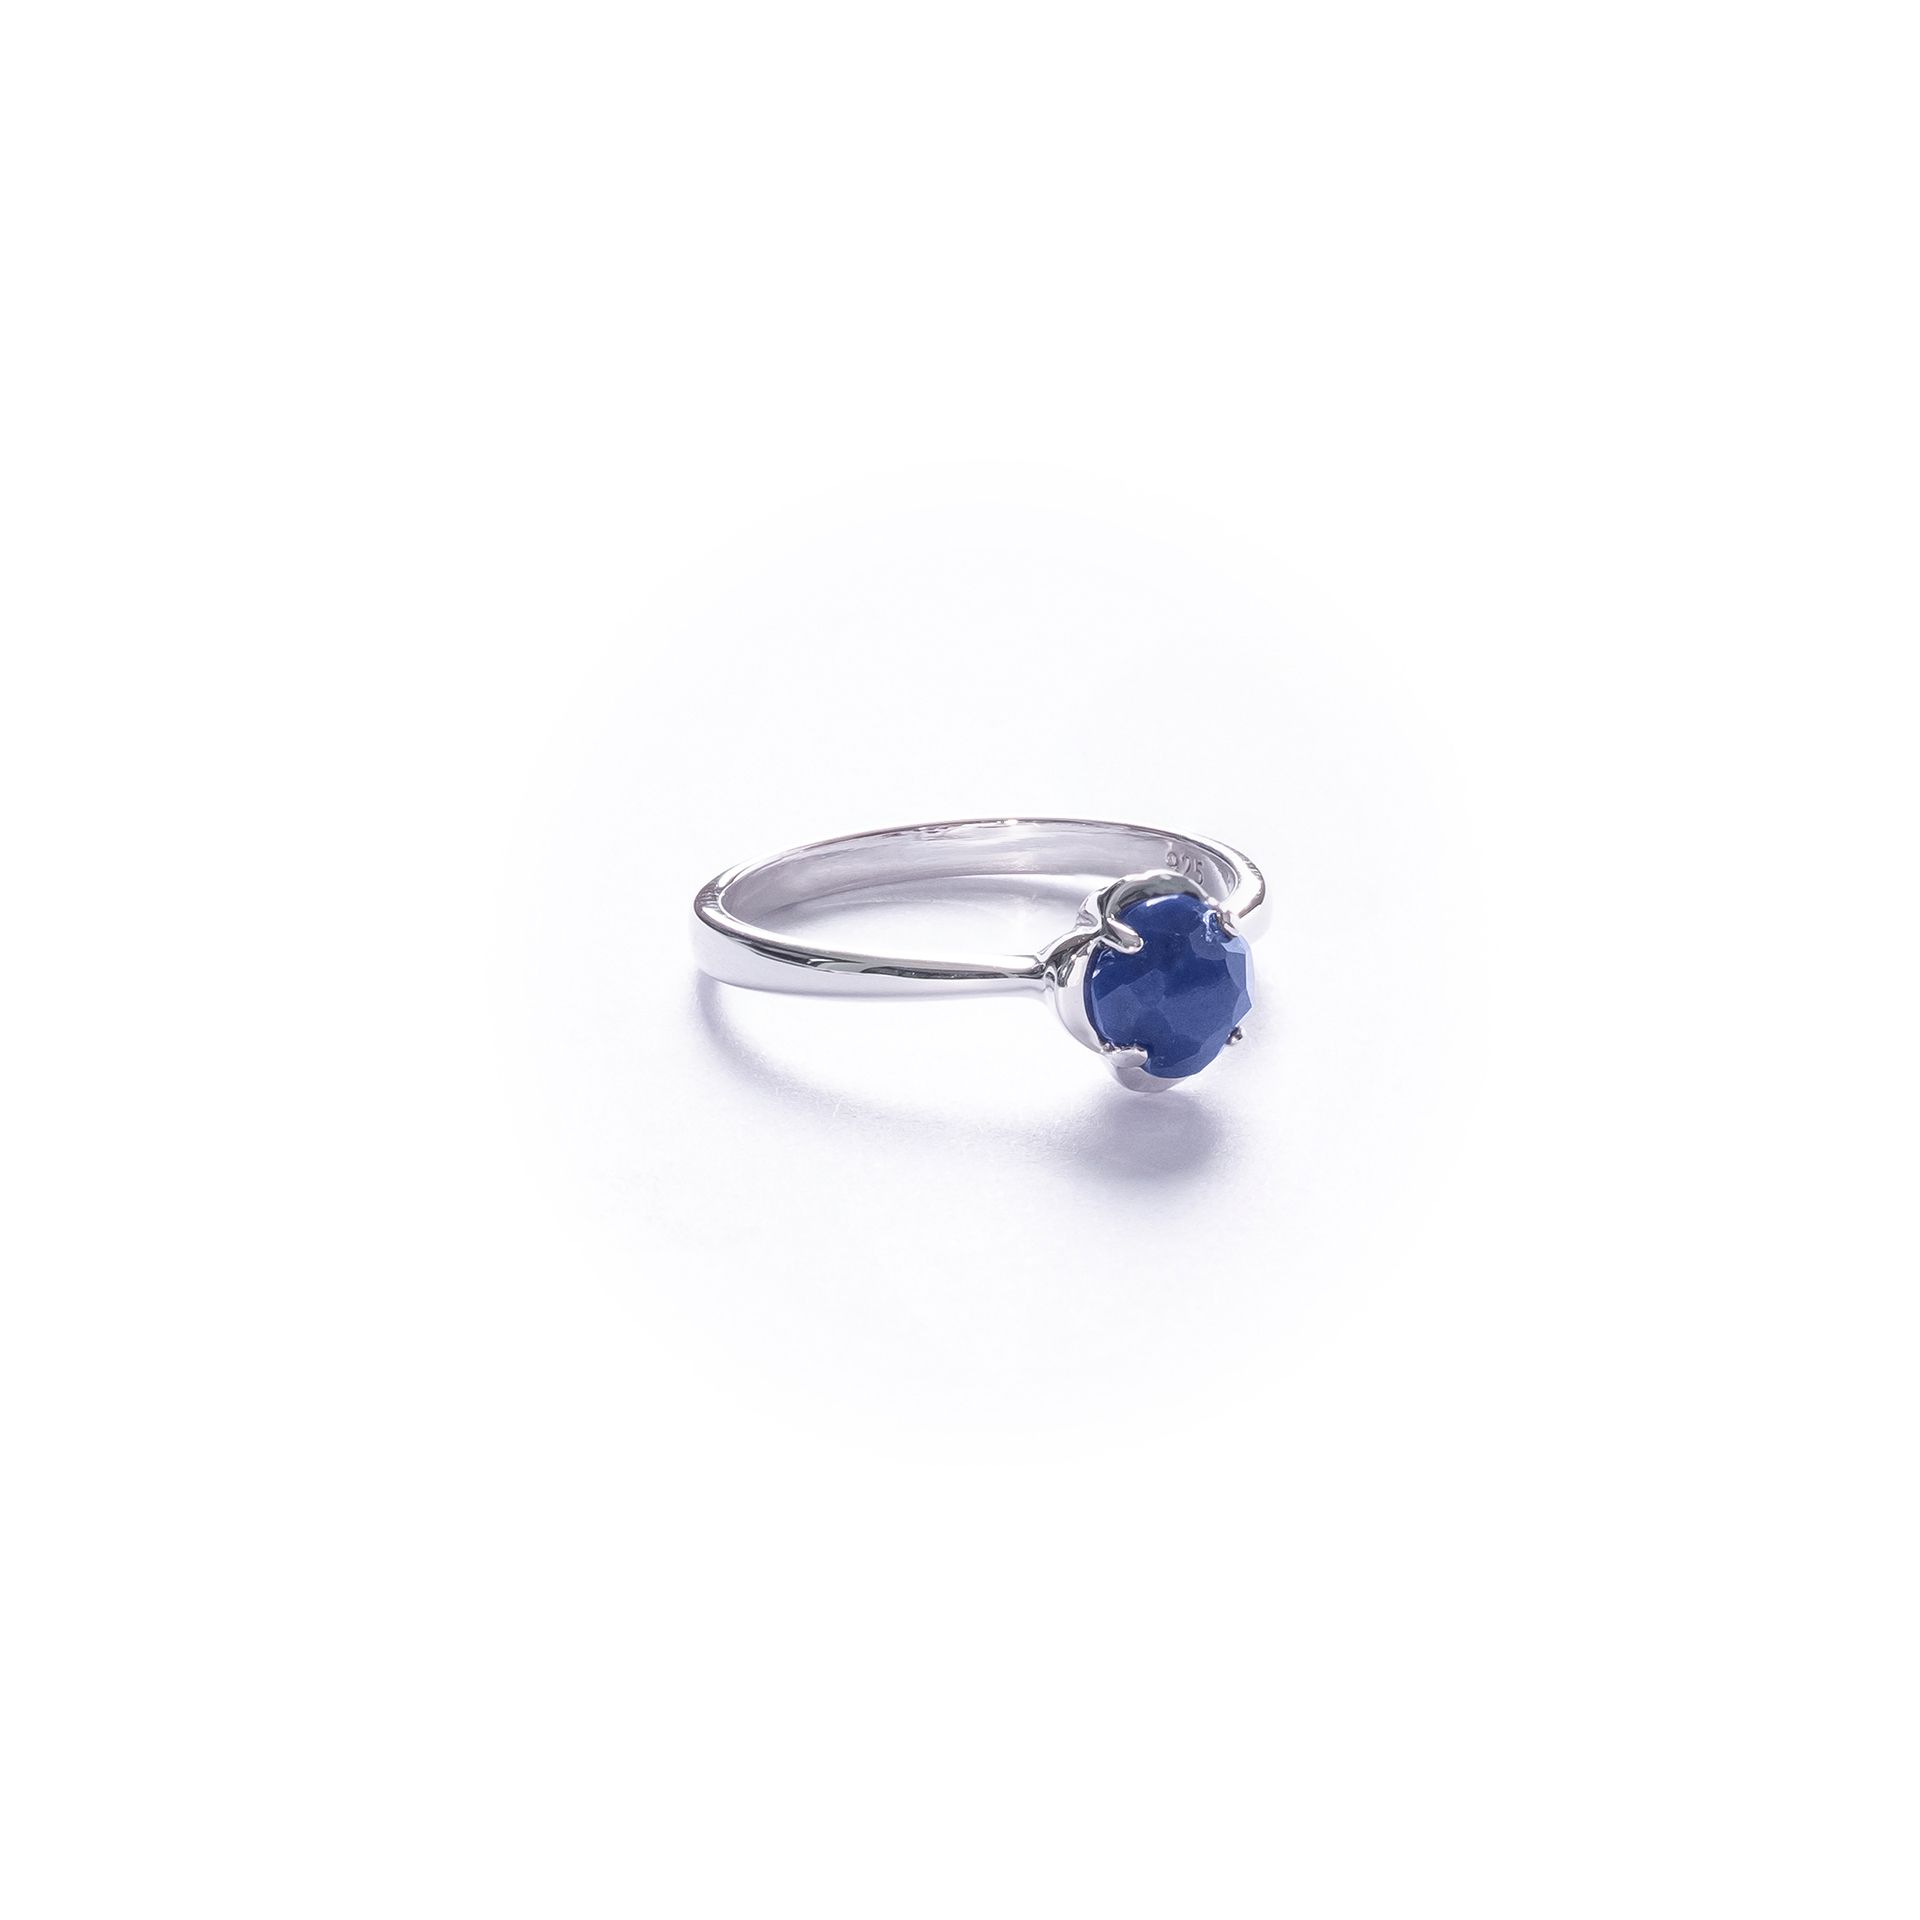 Little Lucky Clover Ring With Lapis Lazuli Throughout Most Recent Lucky Four Leaf Clover Open Rings (View 15 of 25)